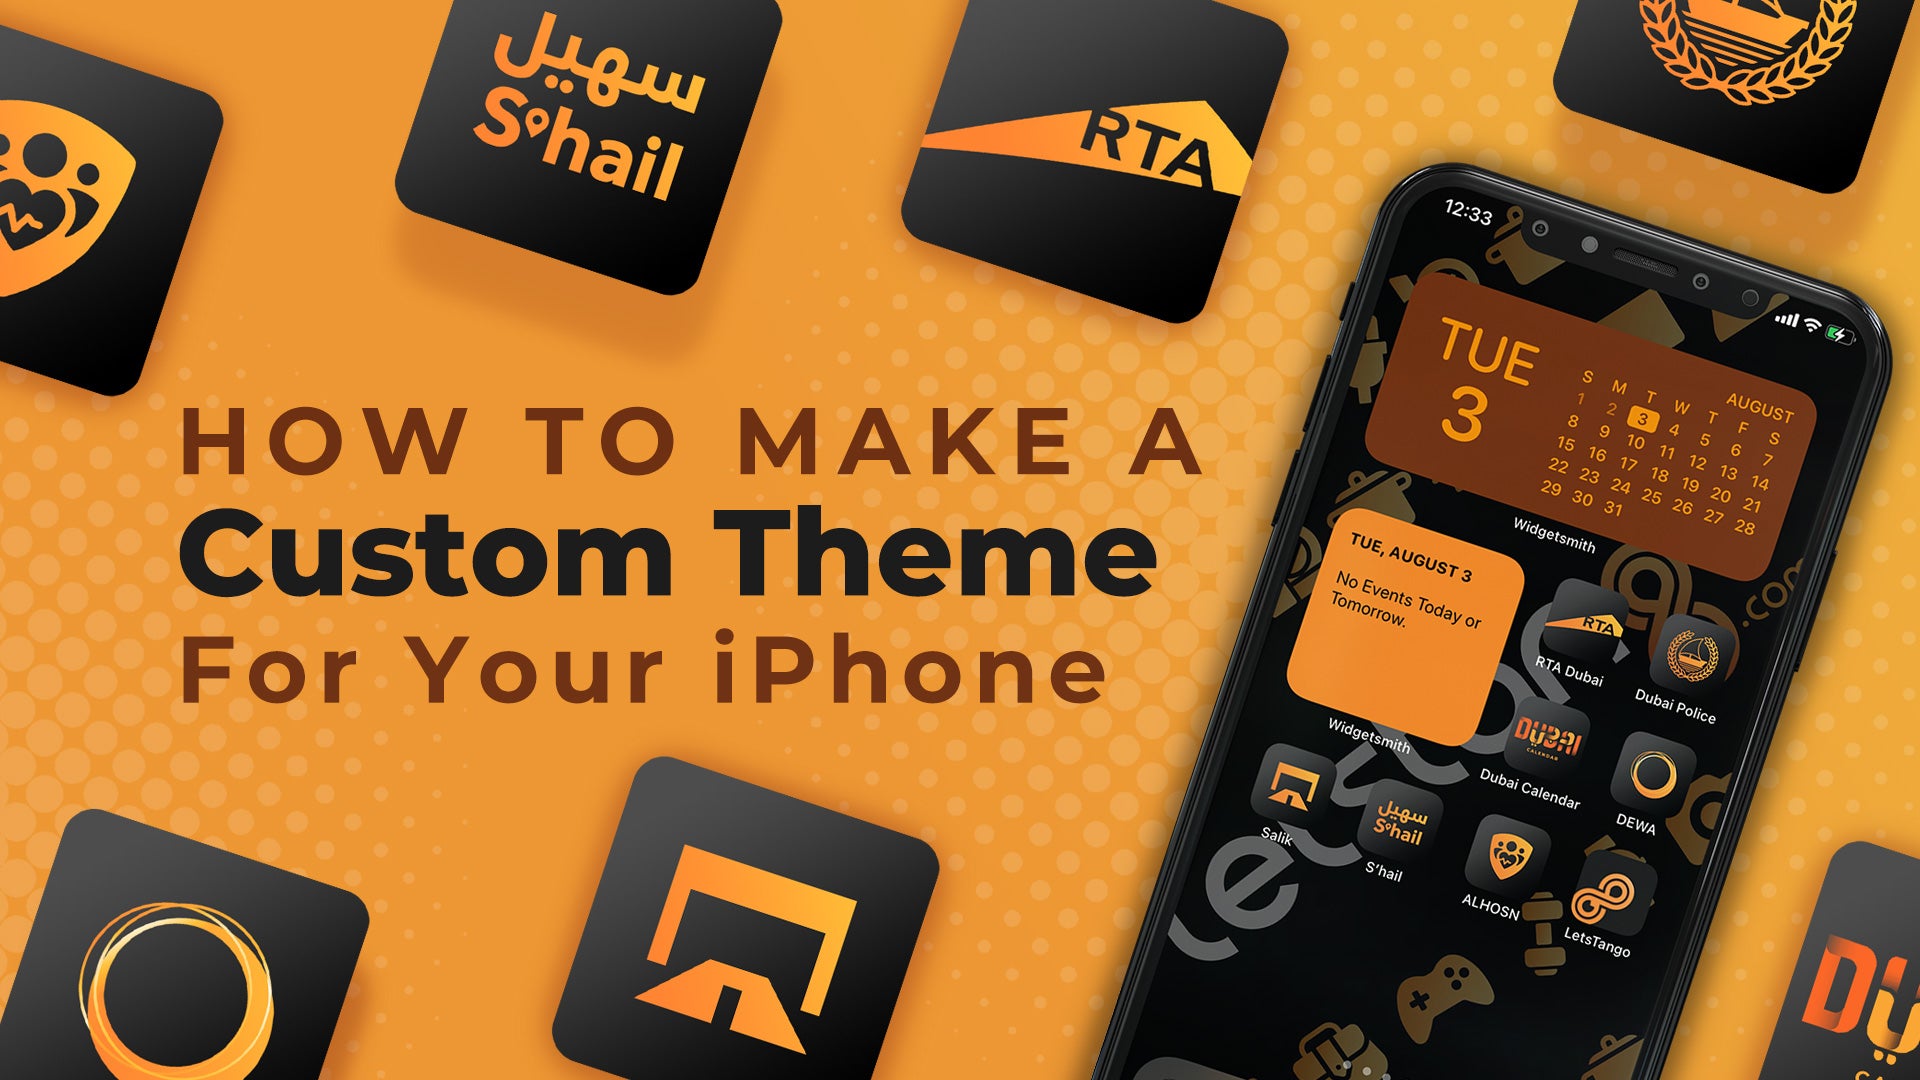 How To Make A Custom Theme For Your iPhone